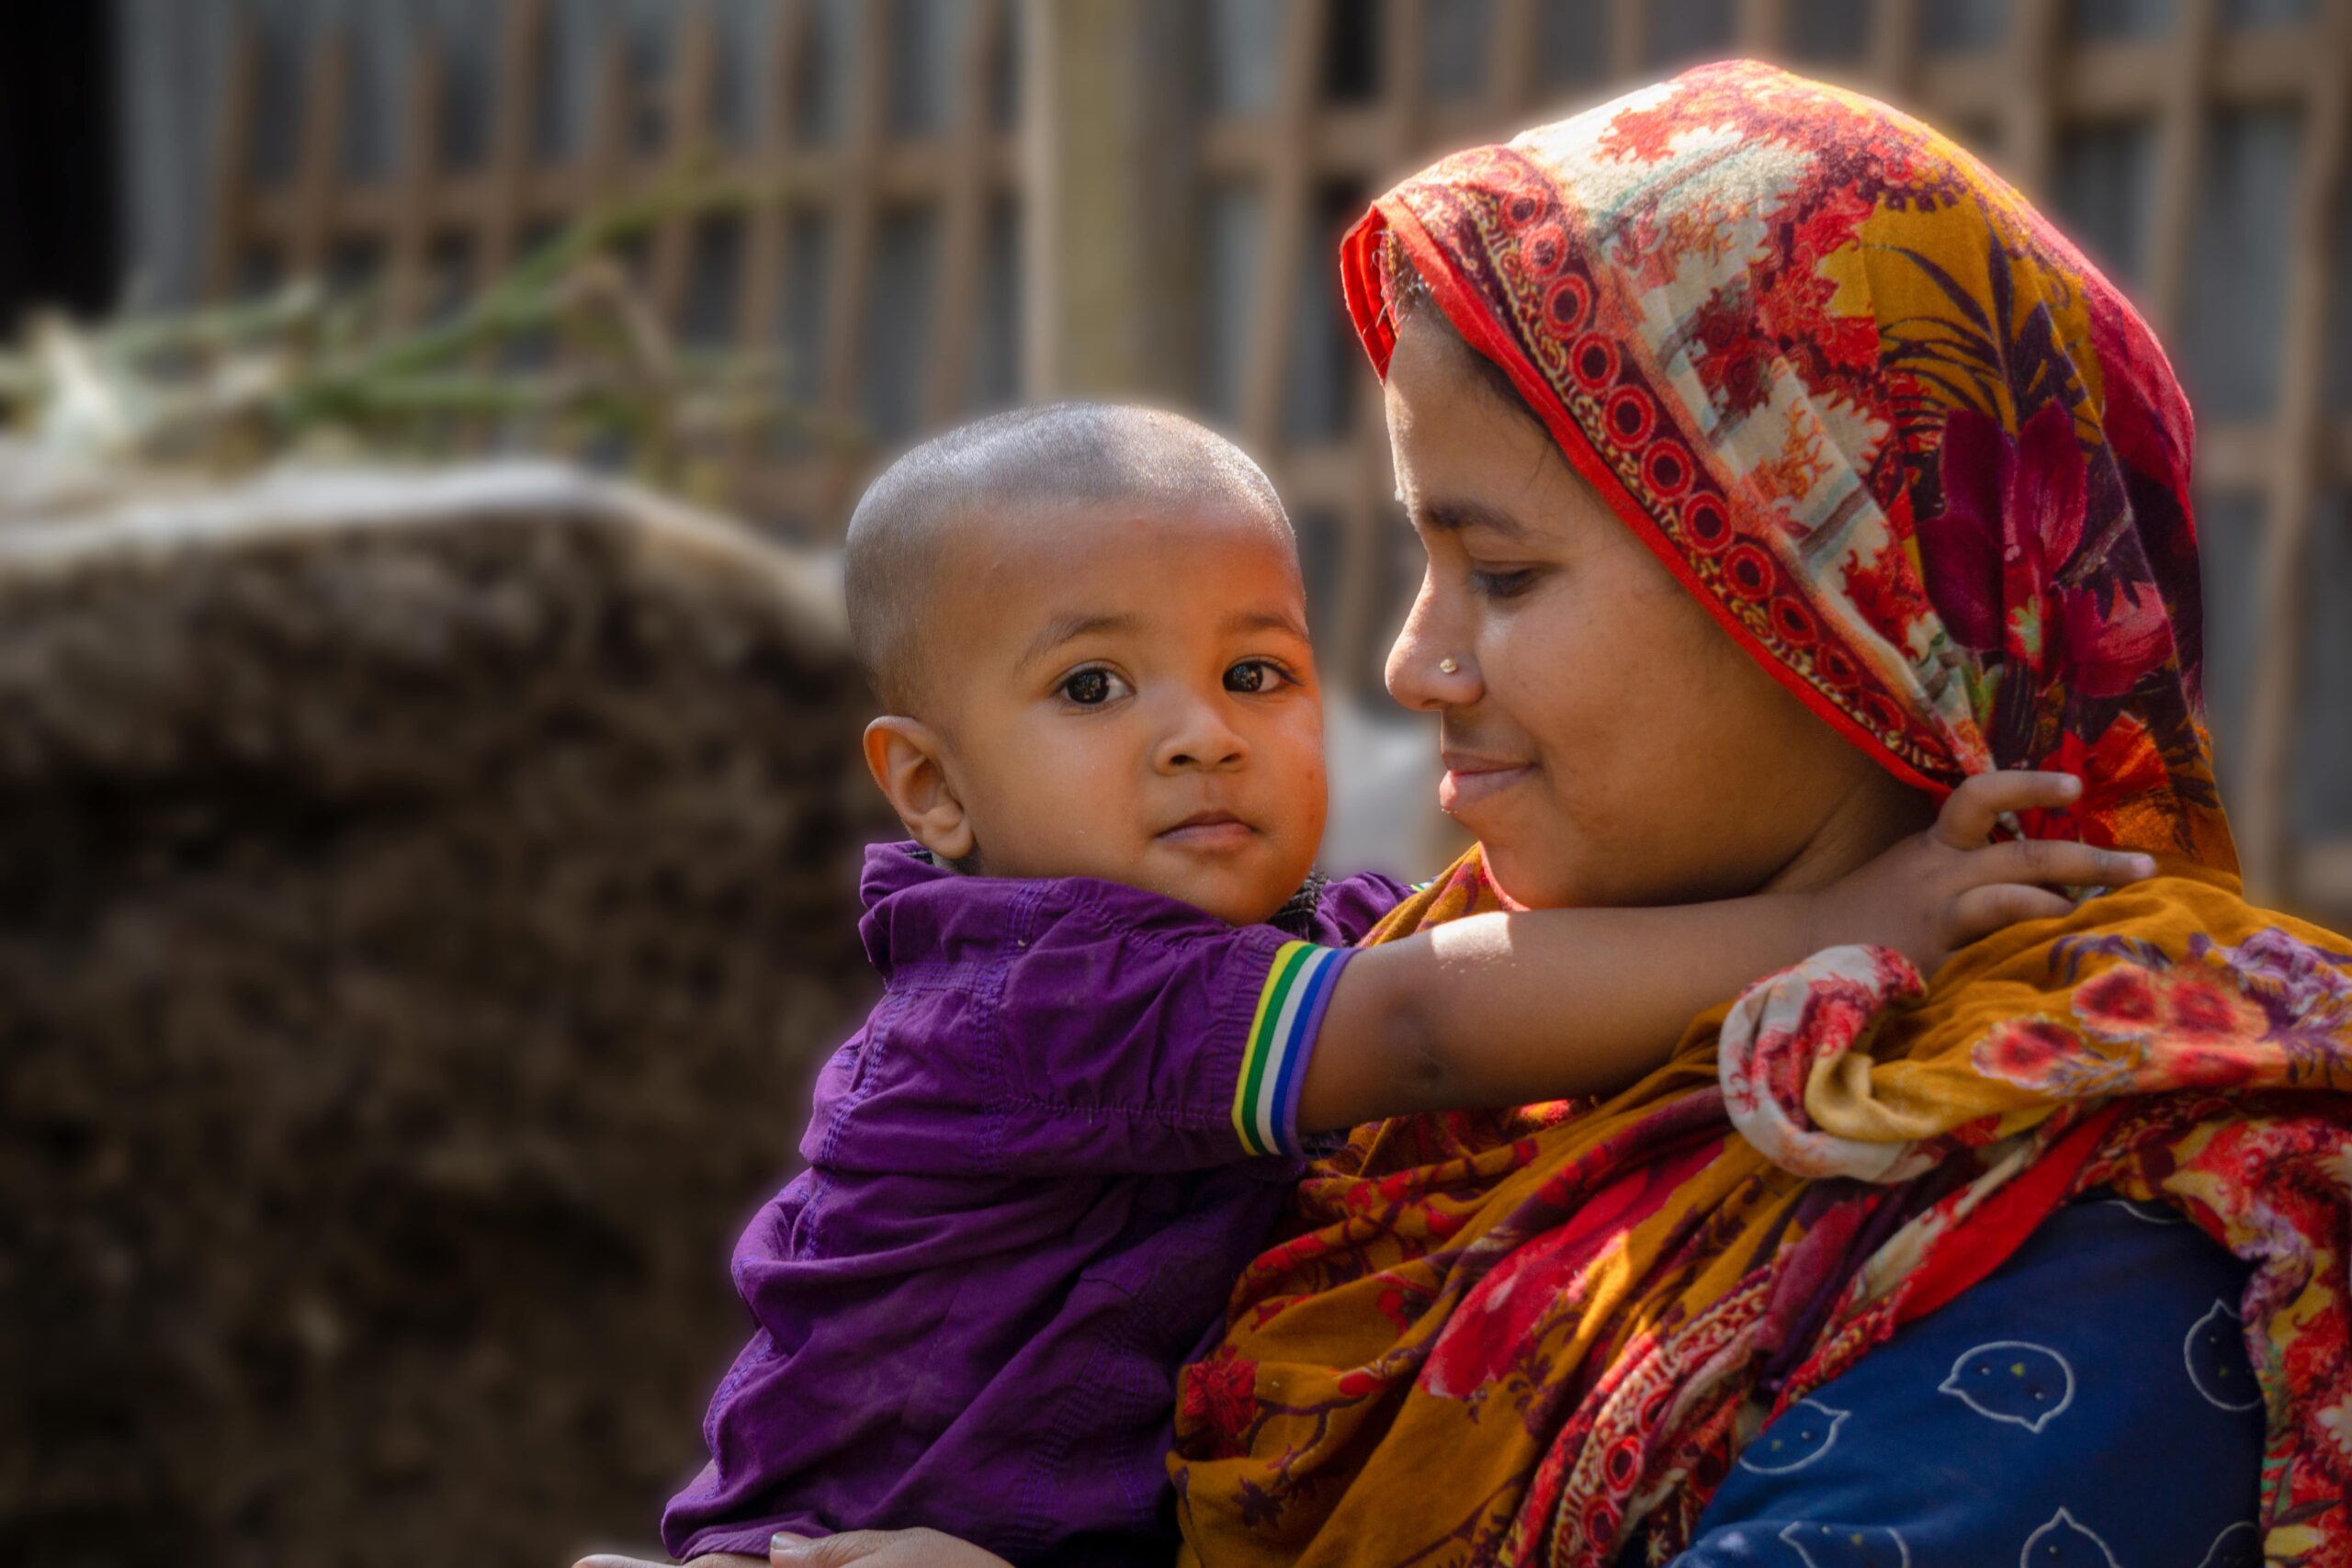 south-asian-women-picture-smiling-loving-moment-bangladeshi-rural-mother-with-her-child-photo-taken-july-7-2023-village-puijor-city-rajbari-bangladesh-min